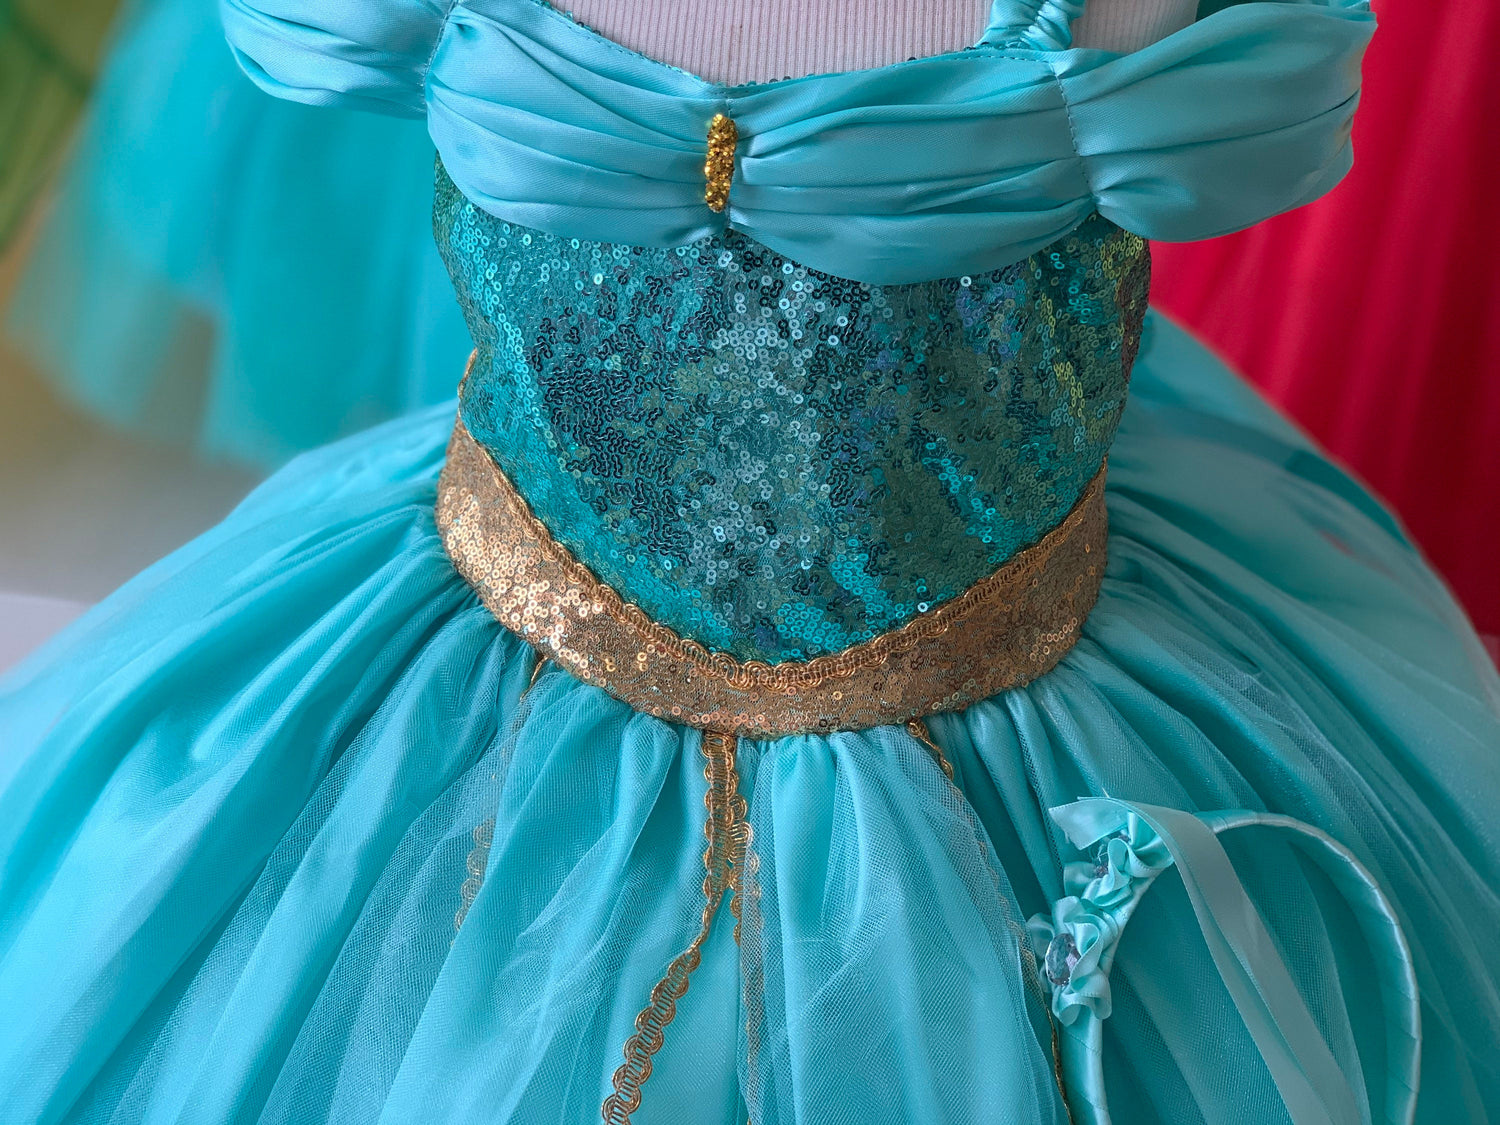 Emma's Magical Dream, Teal sequins with gold accents around the waist, features teal tulle to give the dress fullness, comes with a teal headband with a flower detail.